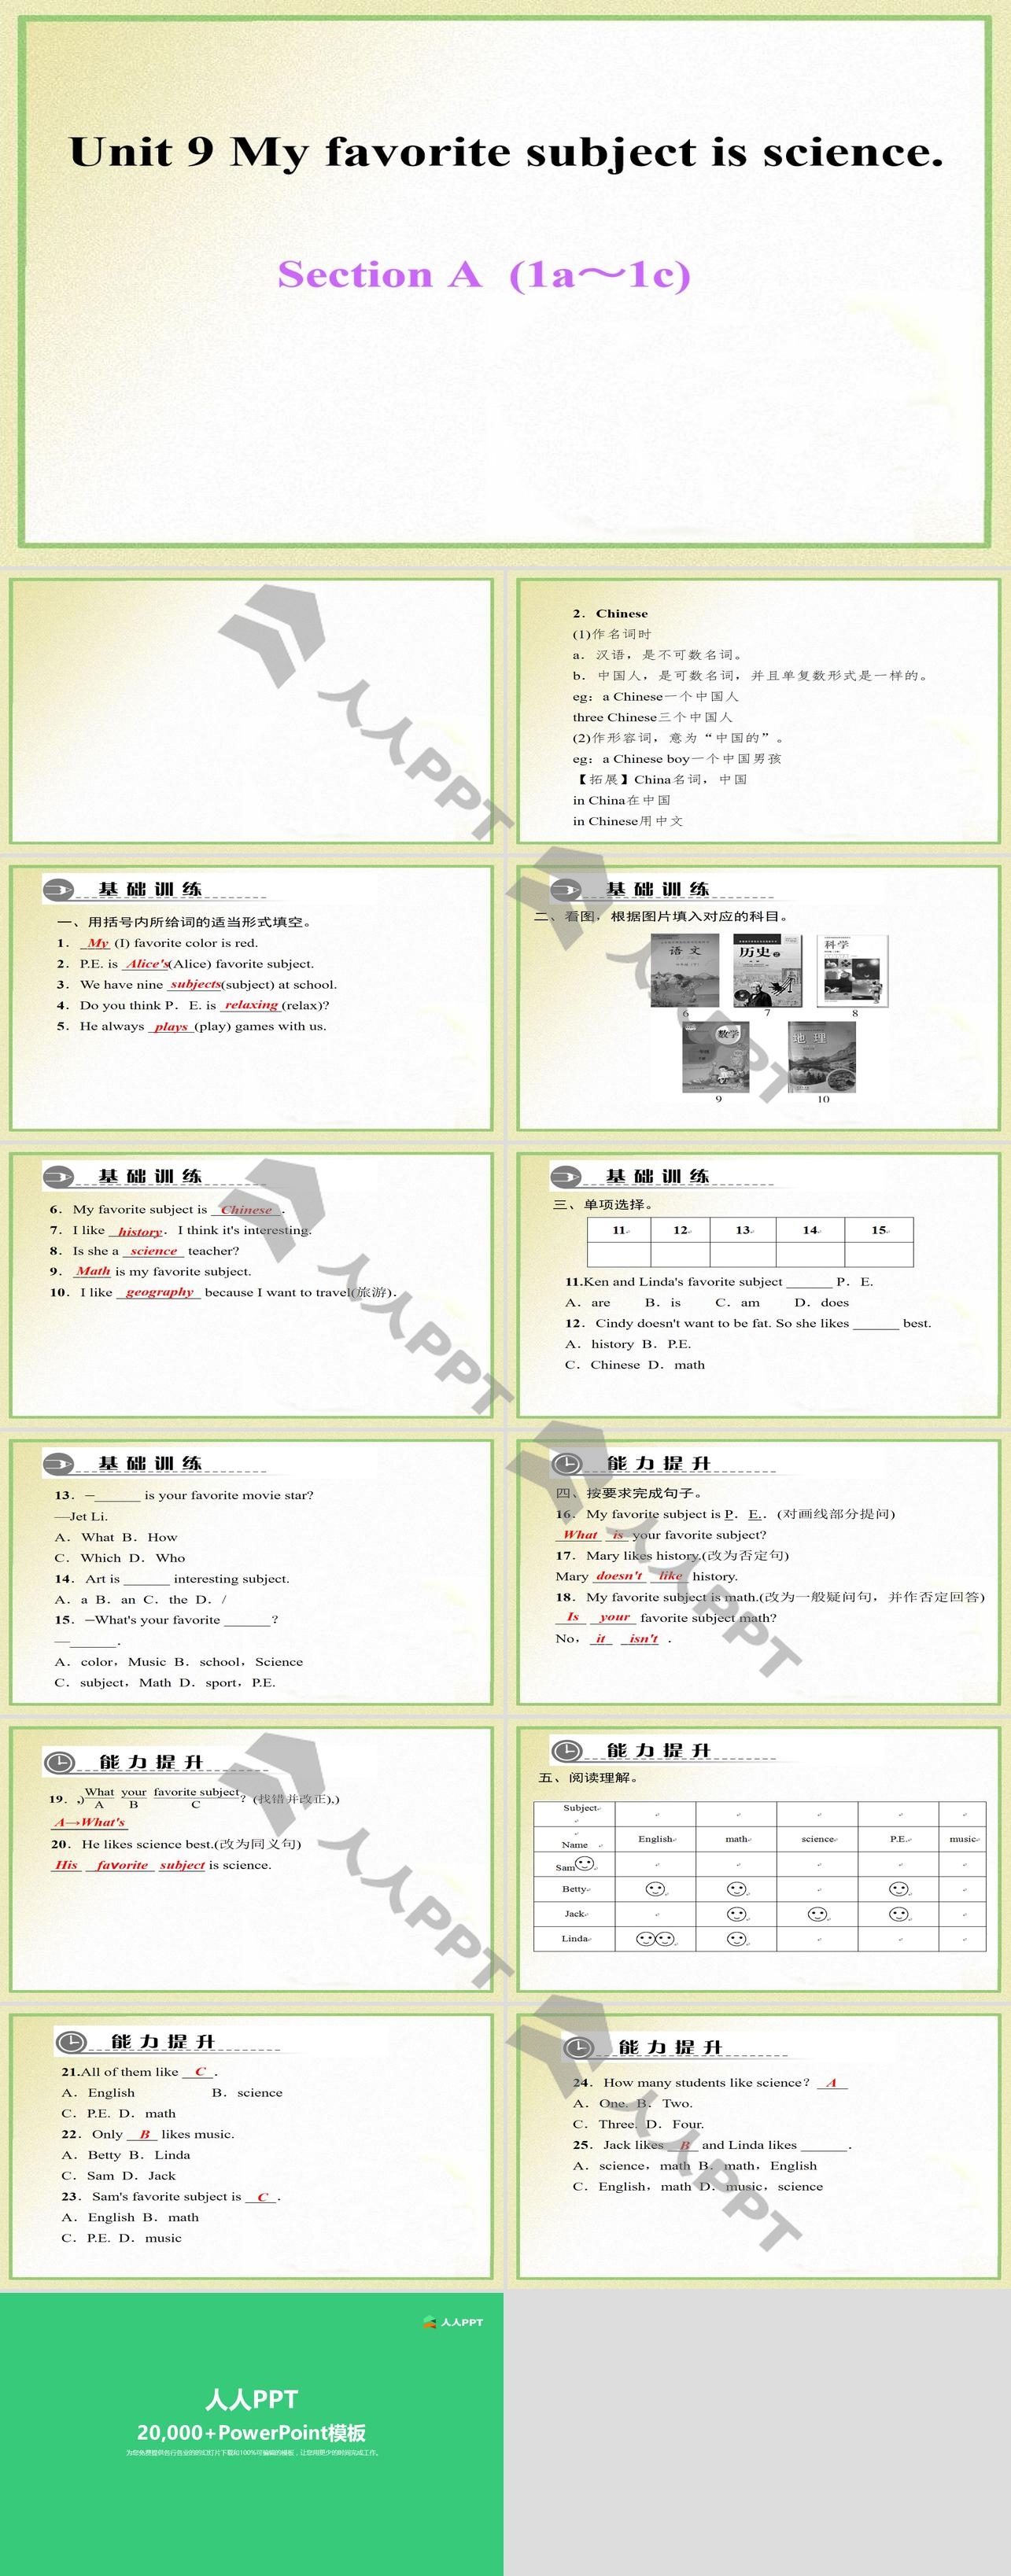 《My favorite subject is science》PPT课件12长图